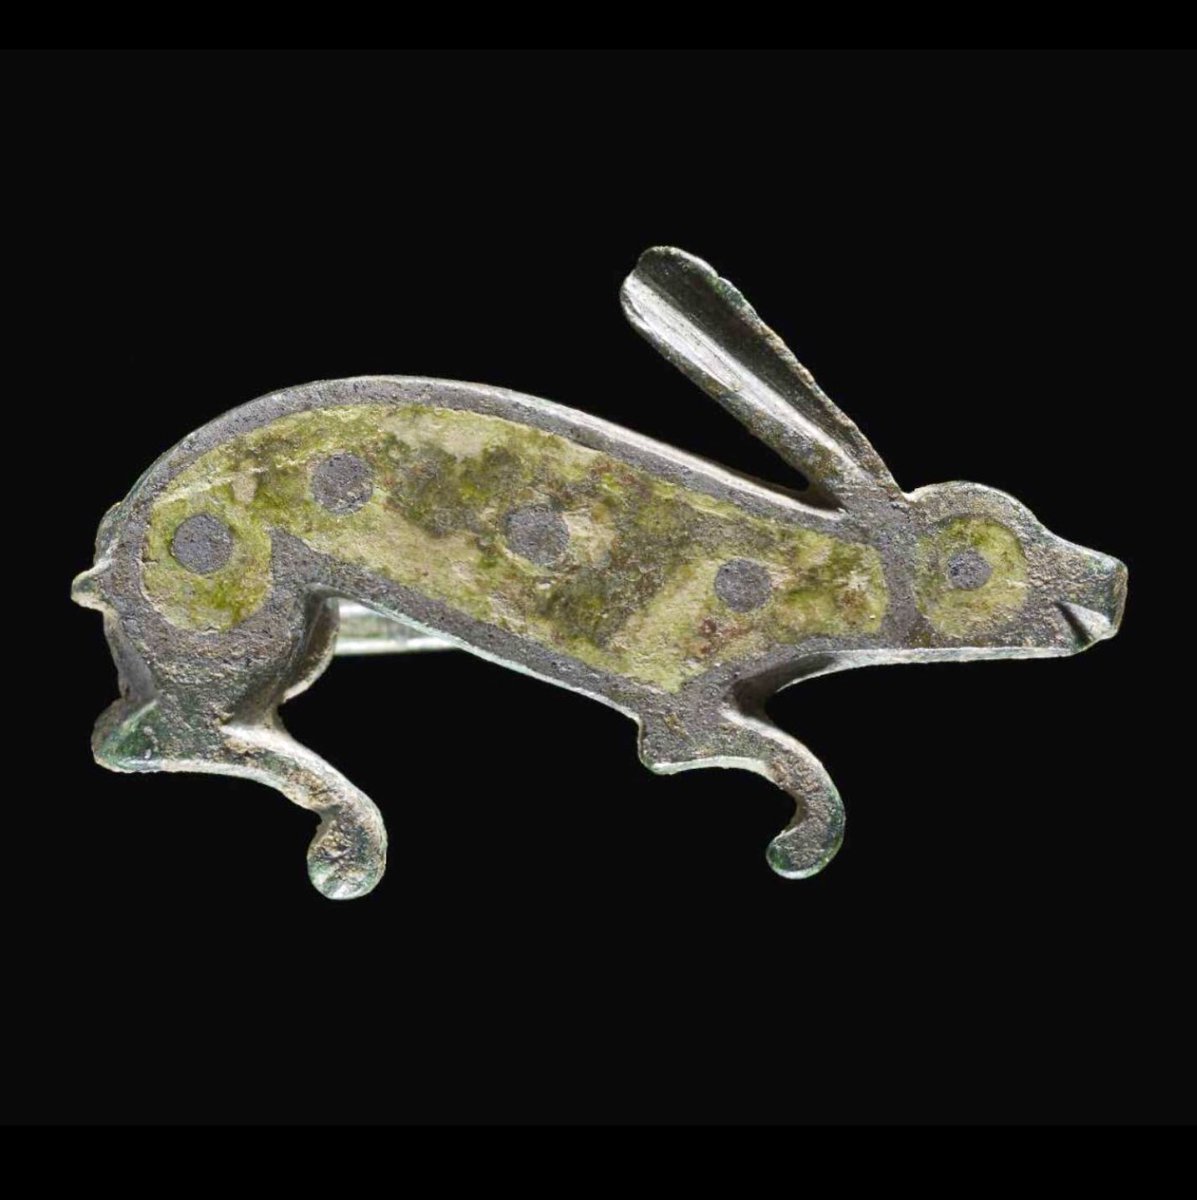 A lovely Romano-British brooch in the form of a hare. The person who made the brooch gave the hare a cheerful little face! 😍 At almost 2,000 years old, this delightful design wouldn’t look too out of place today! Copper alloy and enamel. Photo: British Museum…